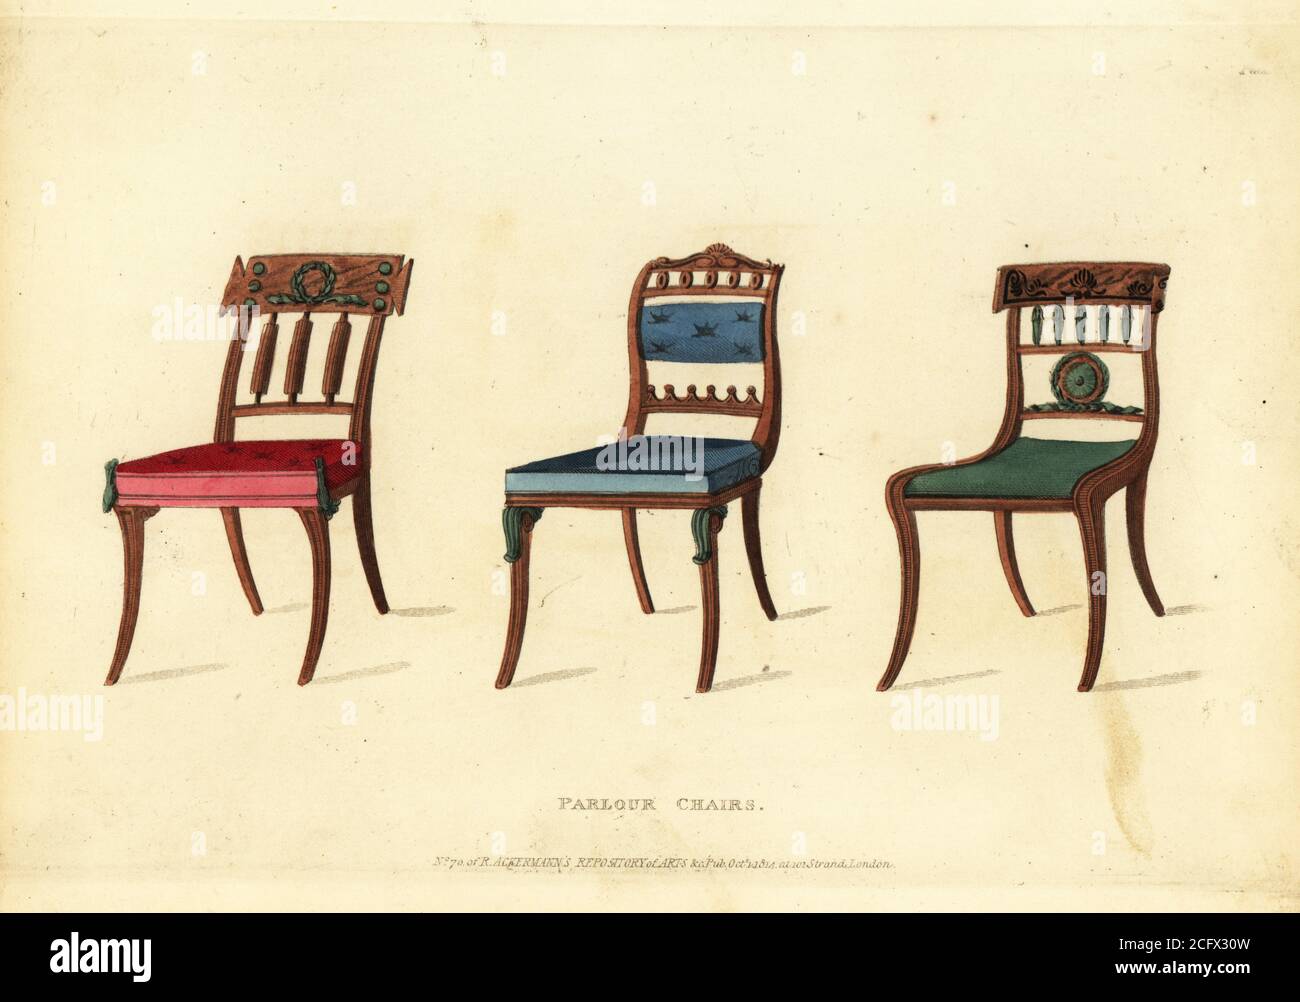 Parlour chairs, 1814. Mahogany dining chair with cane seat, separate cushion 1, Grecian chair in mahogany with bronzed metal knees 2, and Trafalgar chair after Lord Horatio Nelson with ebony inlay yoke, bronzed metal ornaments 3. Handcoloured copperplate engraving from The Upholsterer's and Cabinet-Maker's Repository consisting of seventy-six designs of modern and fashionable furniture, Rudolph Ackermann, London, 1830. Stock Photo